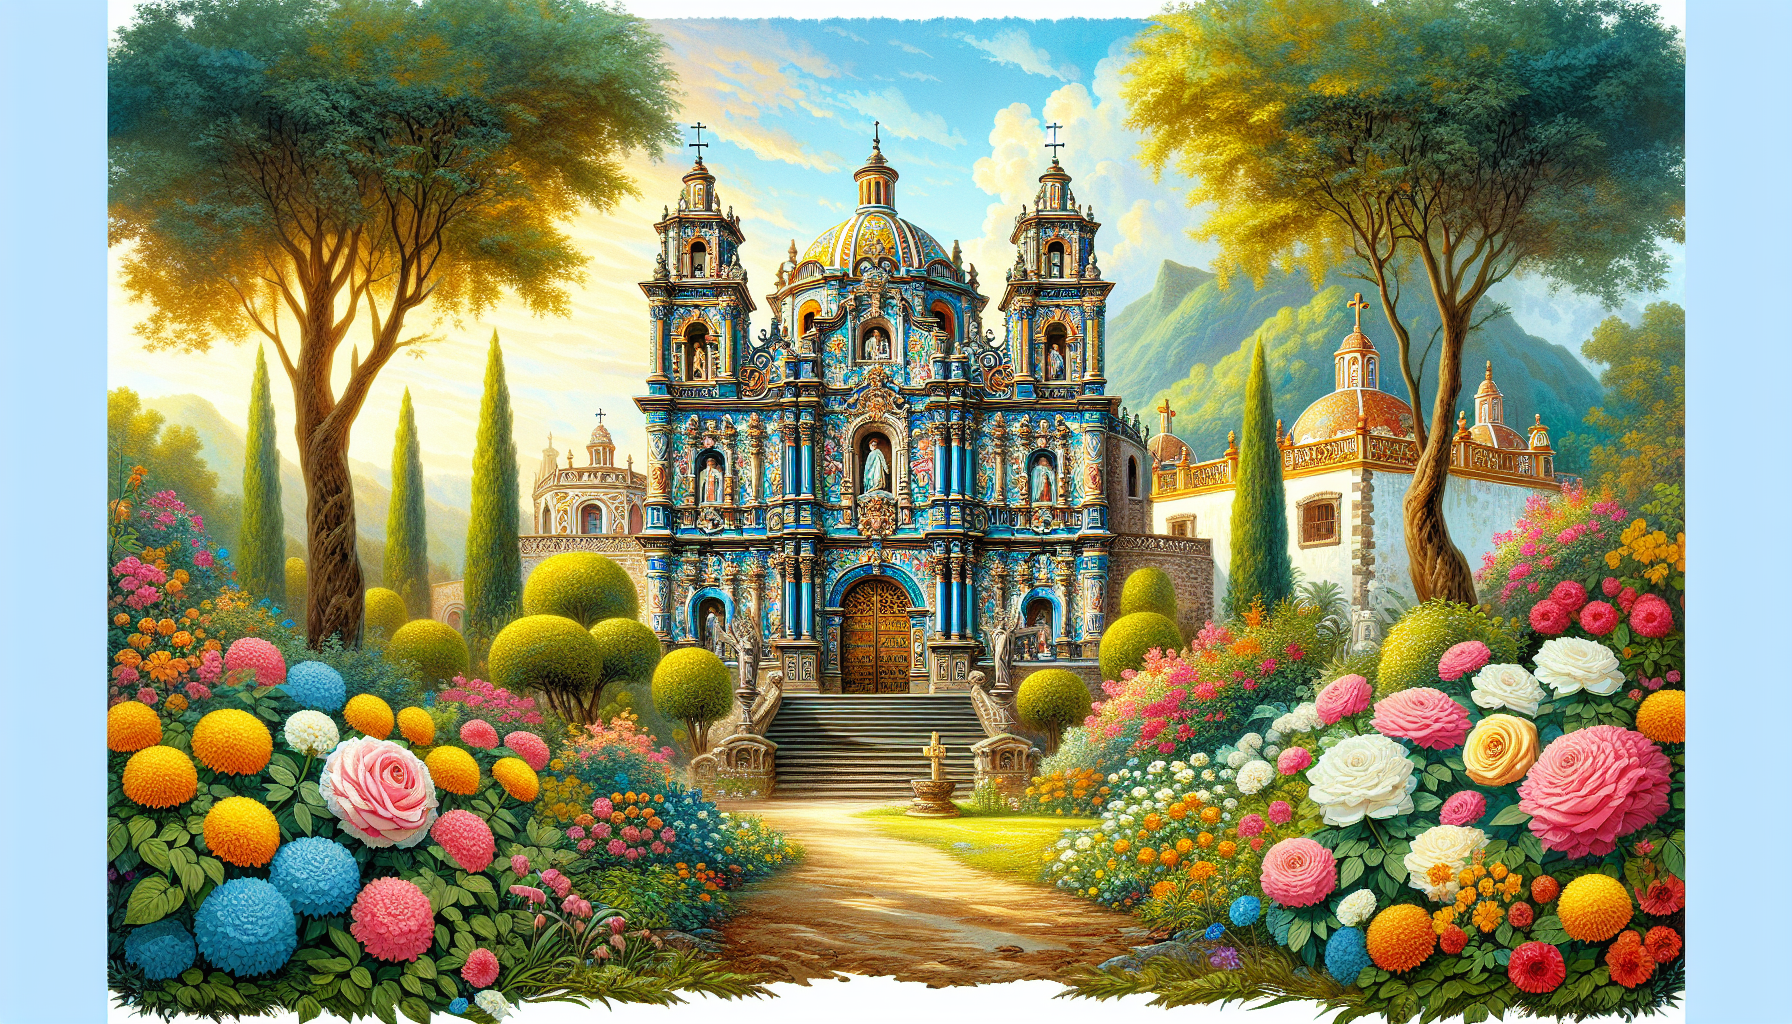 Create an image of a picturesque Catholic sanctuary in Mexico, showcasing ornate architecture and vibrant colors, surrounded by lush greenery and blooming flowers. Capture the essence of spirituality